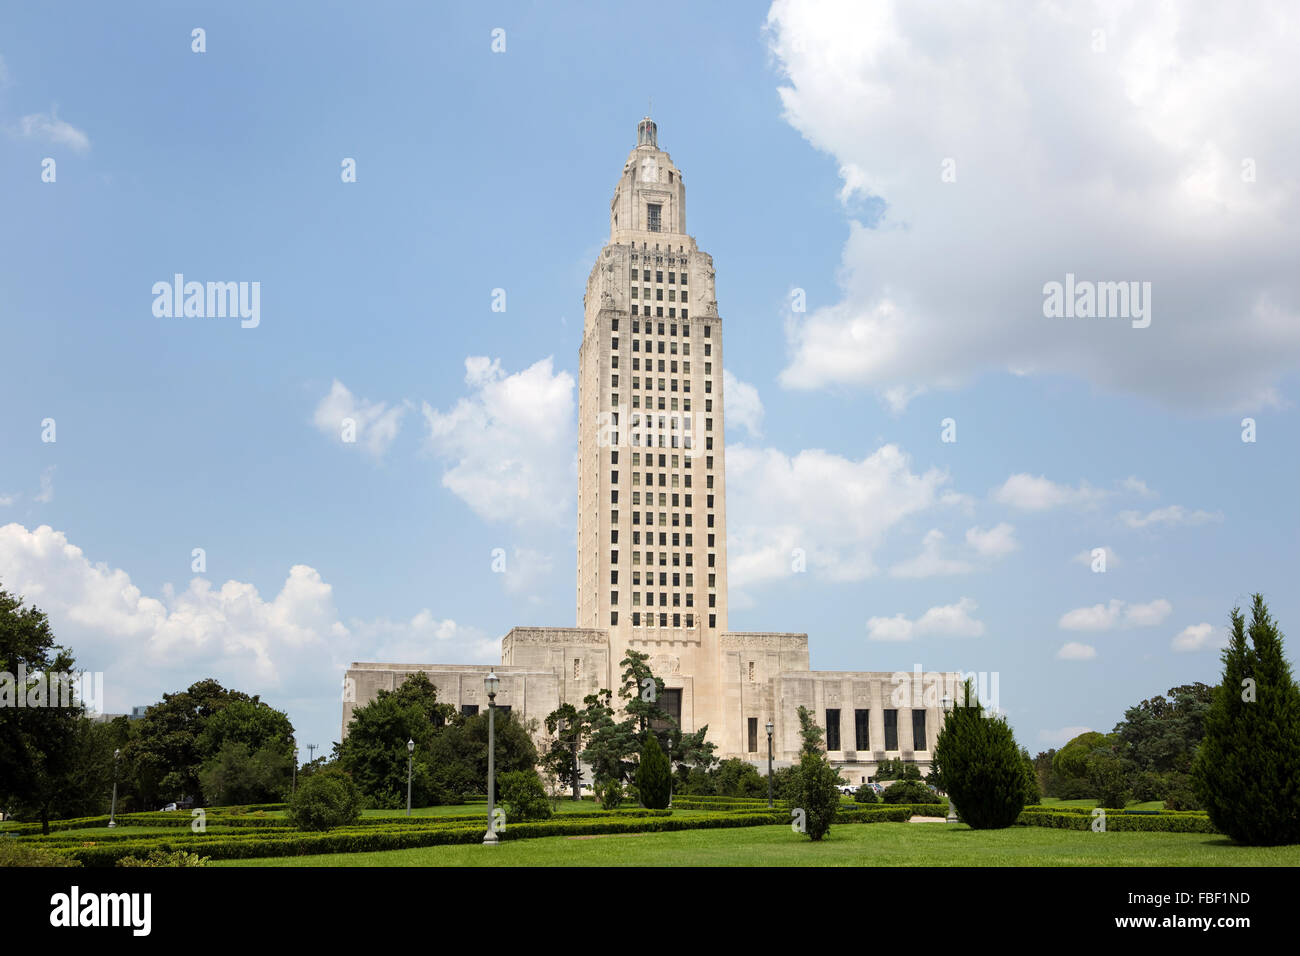 Louisiana State Capitol building which is located in Baton Rouge, LA, USA. Stock Photo